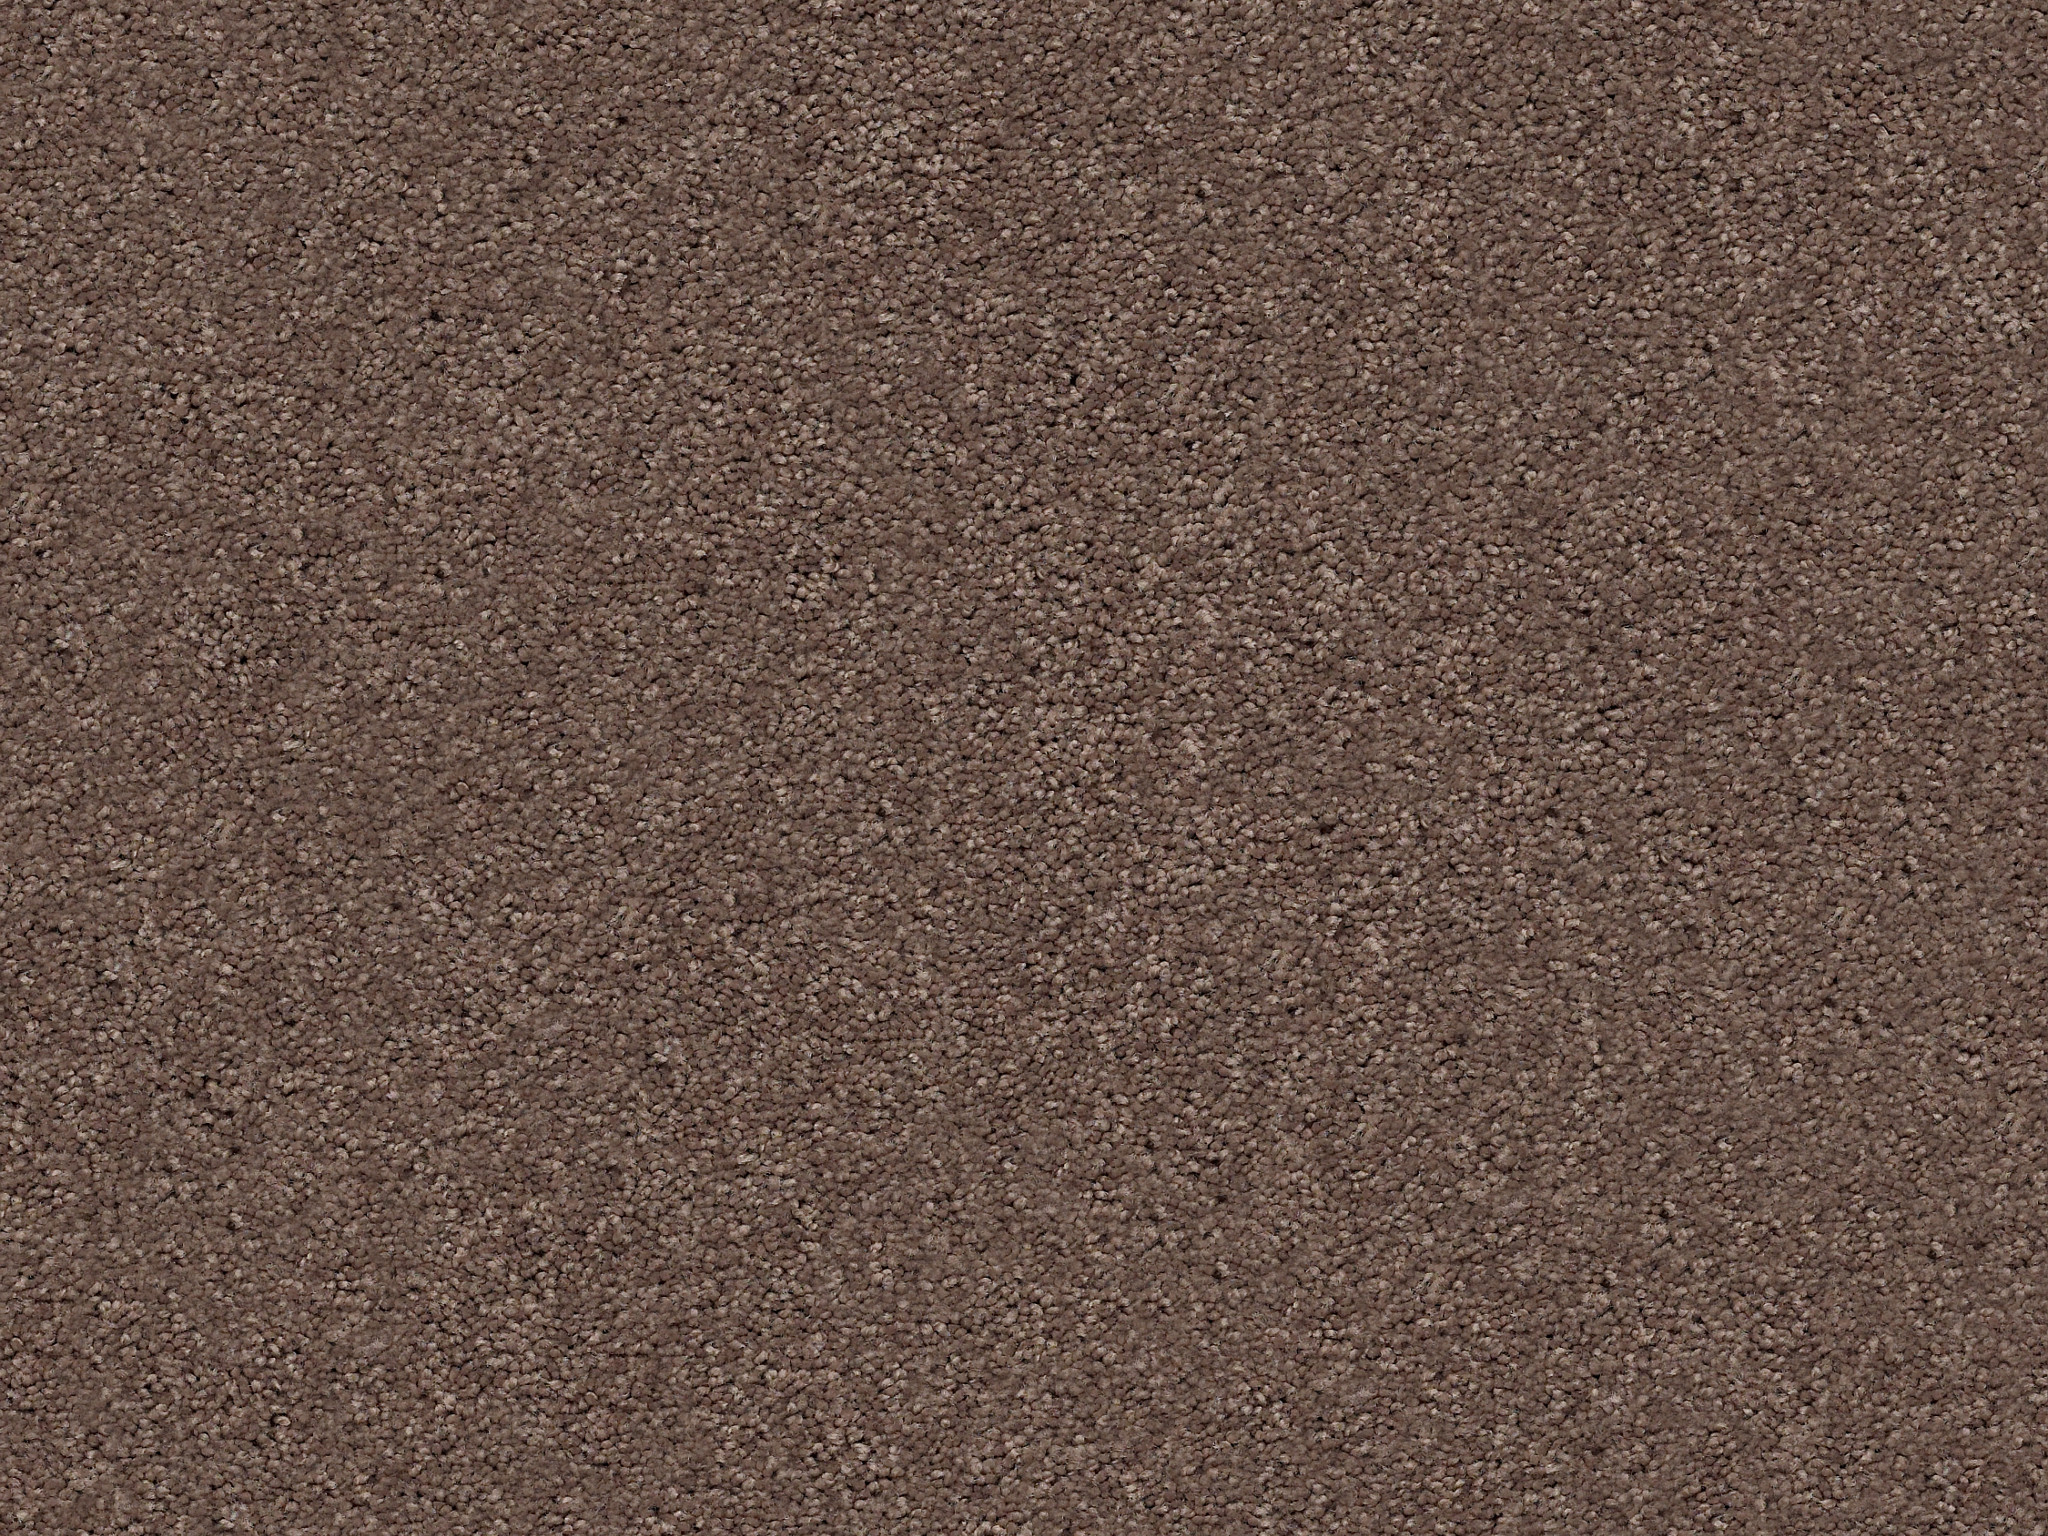 First Act Carpet - Chantrelle Zoomed Swatch Image